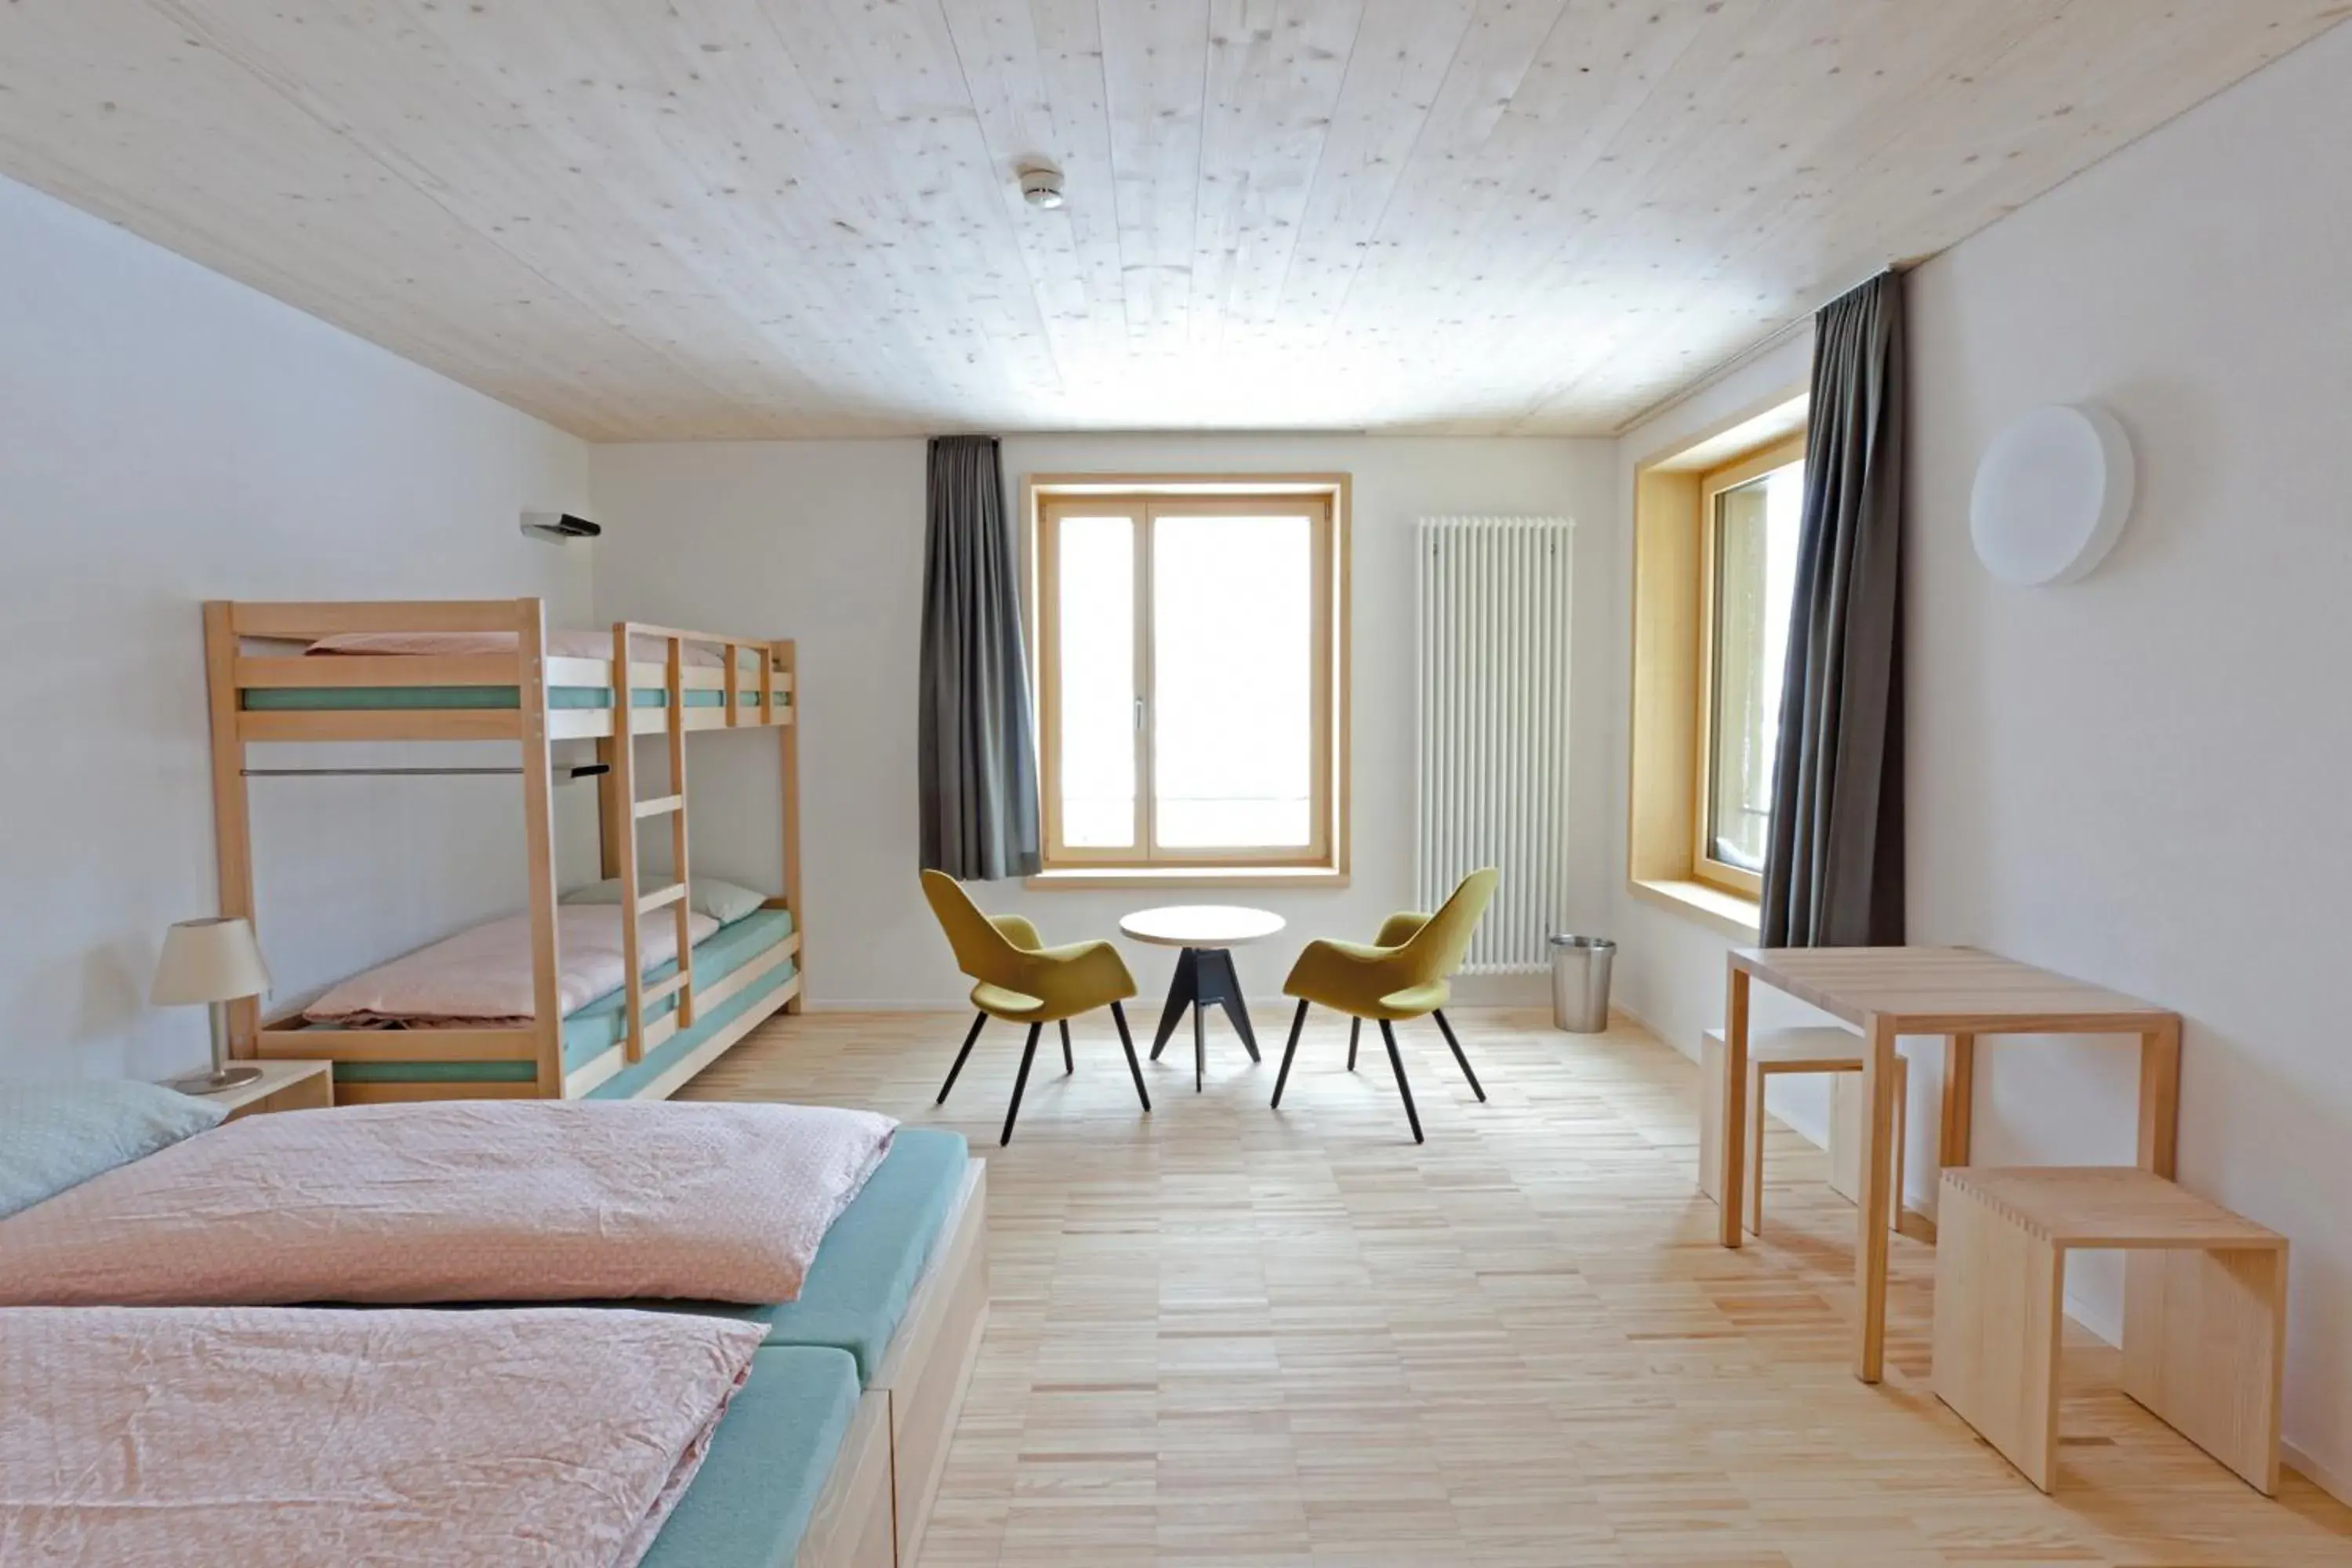 Bed, Bunk Bed in St. Moritz Youth Hostel